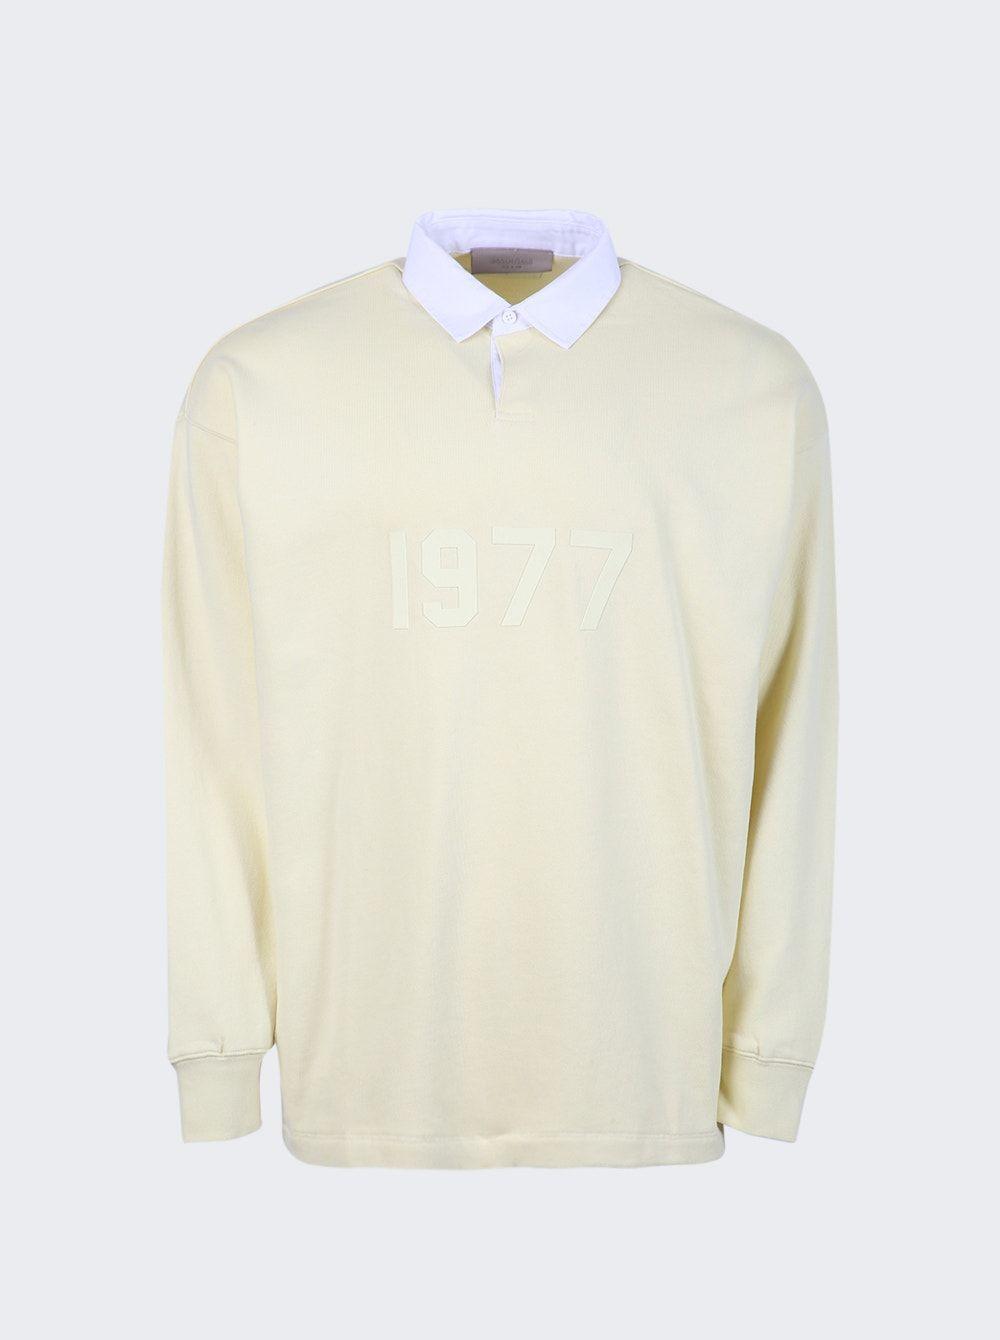 Fear of God ESSENTIALS Henley Rugby Top in White for Men | Lyst